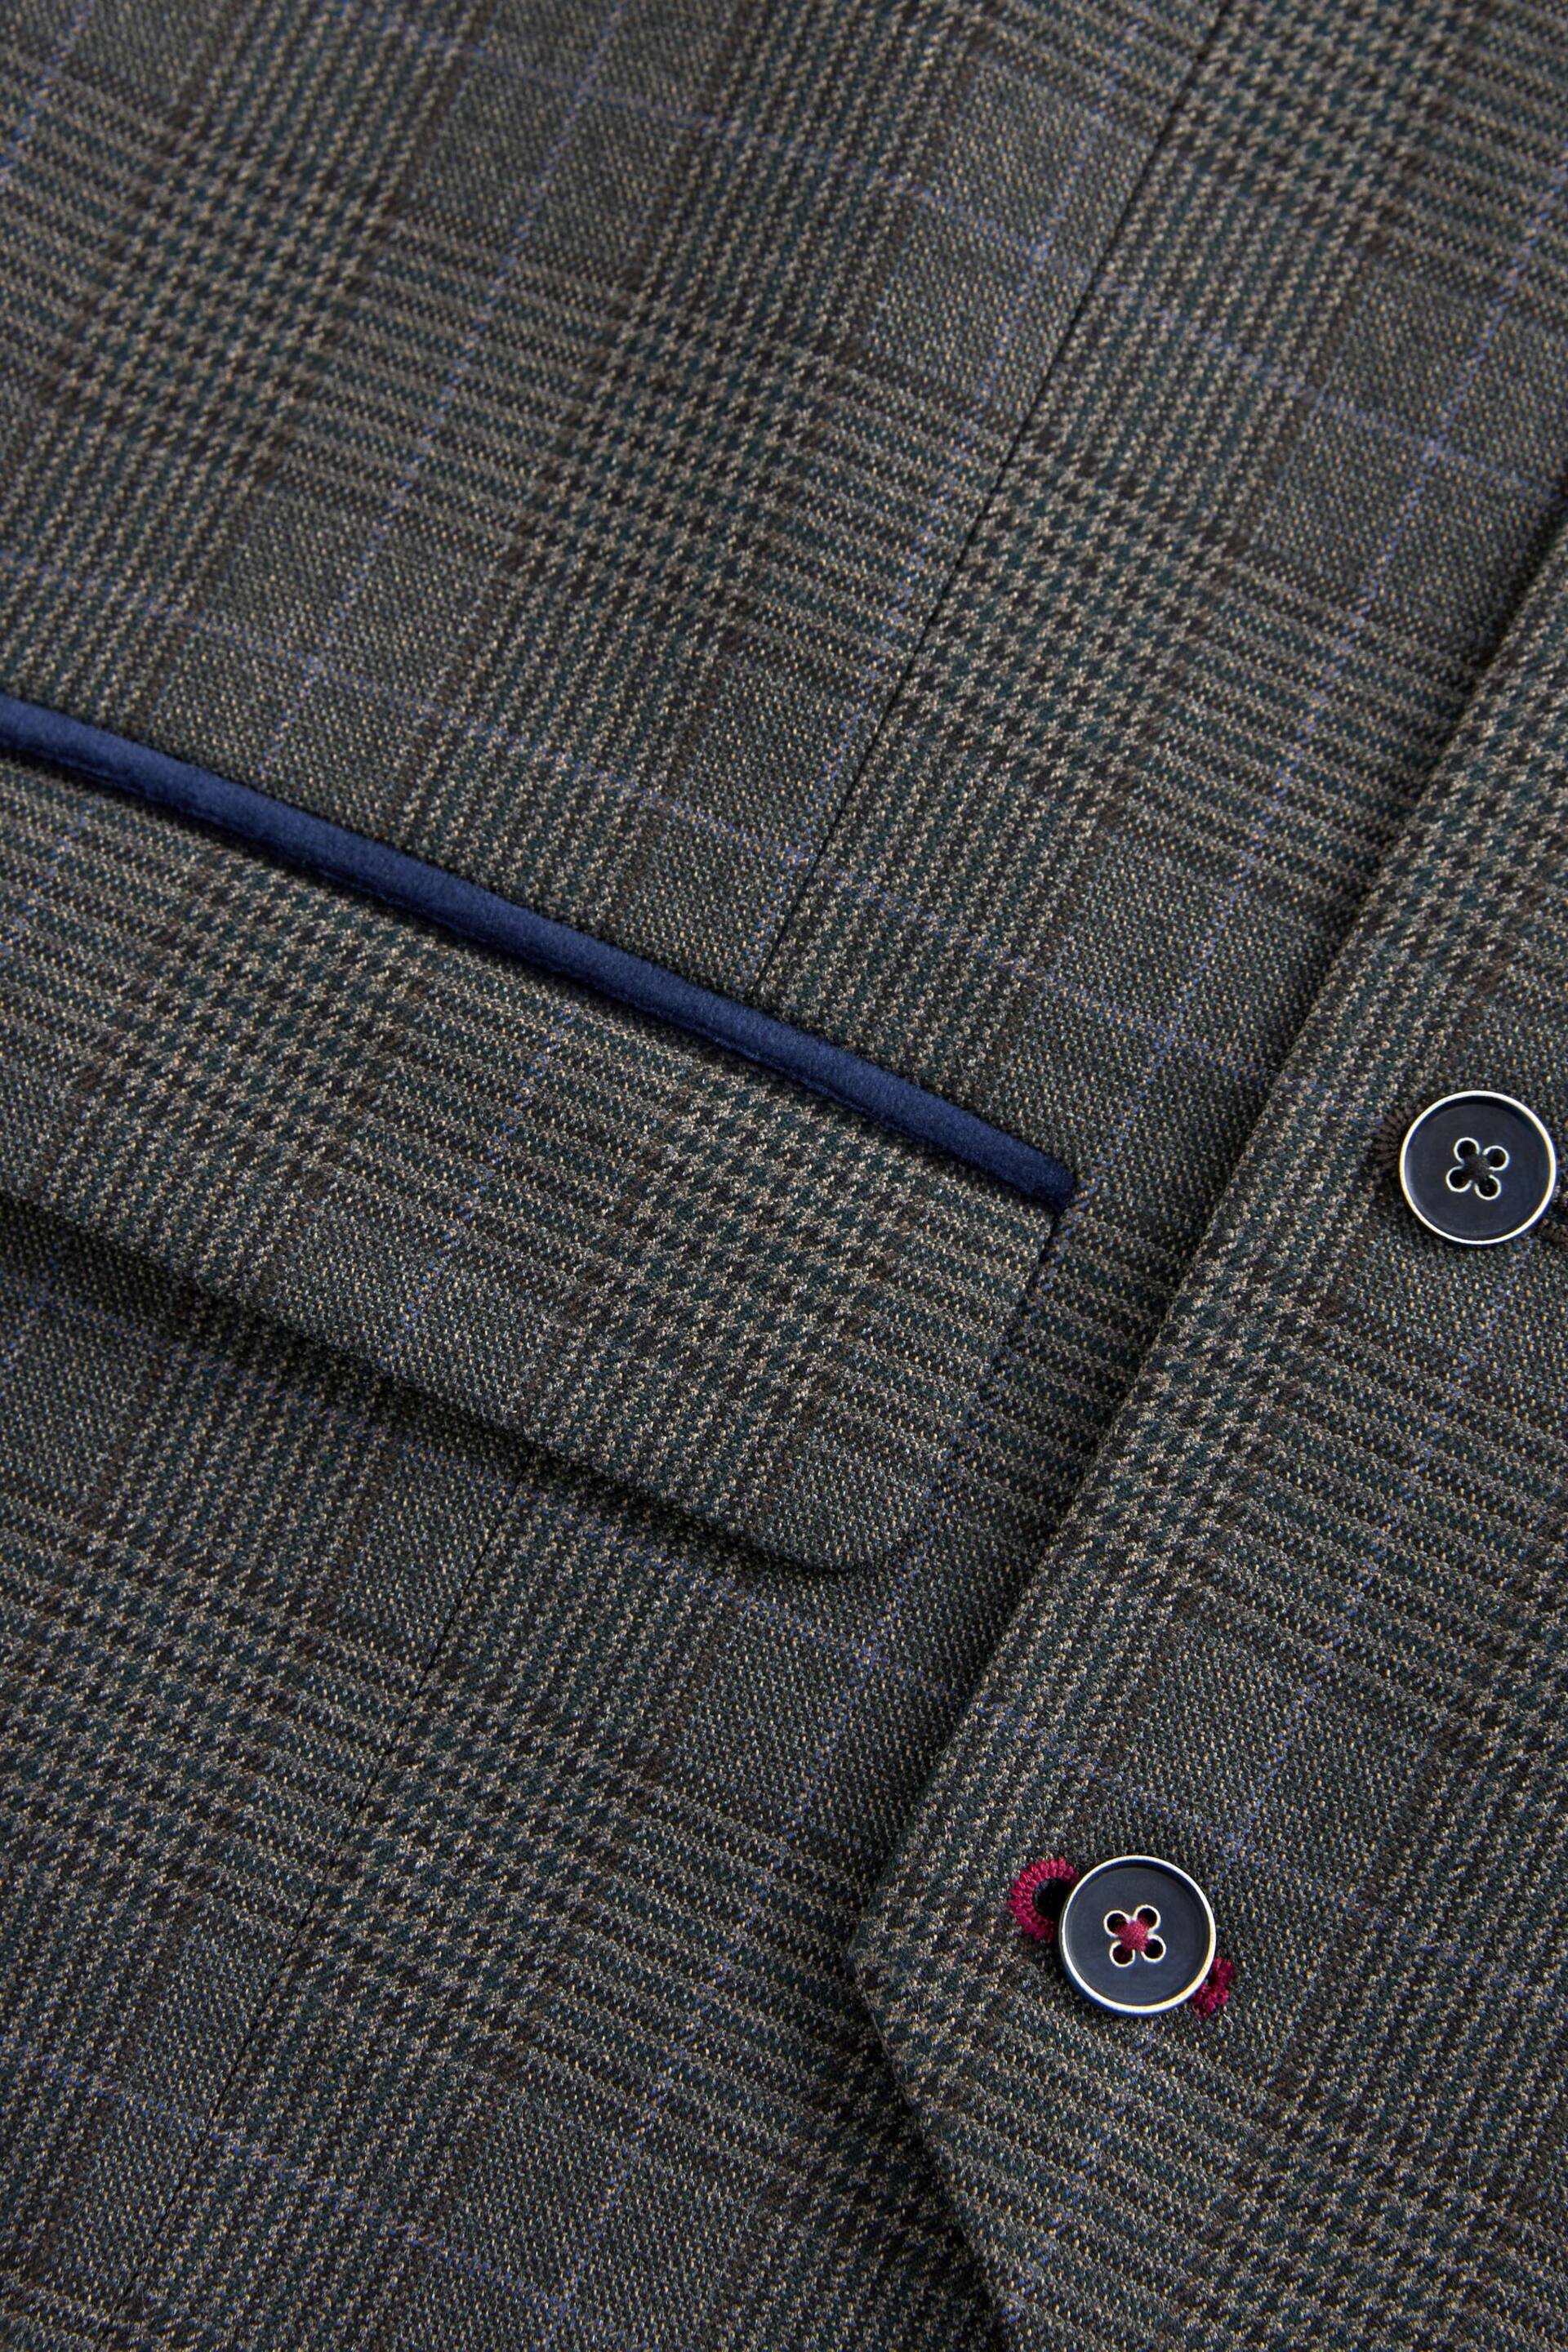 Green Slim Trimmed Check Suit: Waistcoat - Image 6 of 11